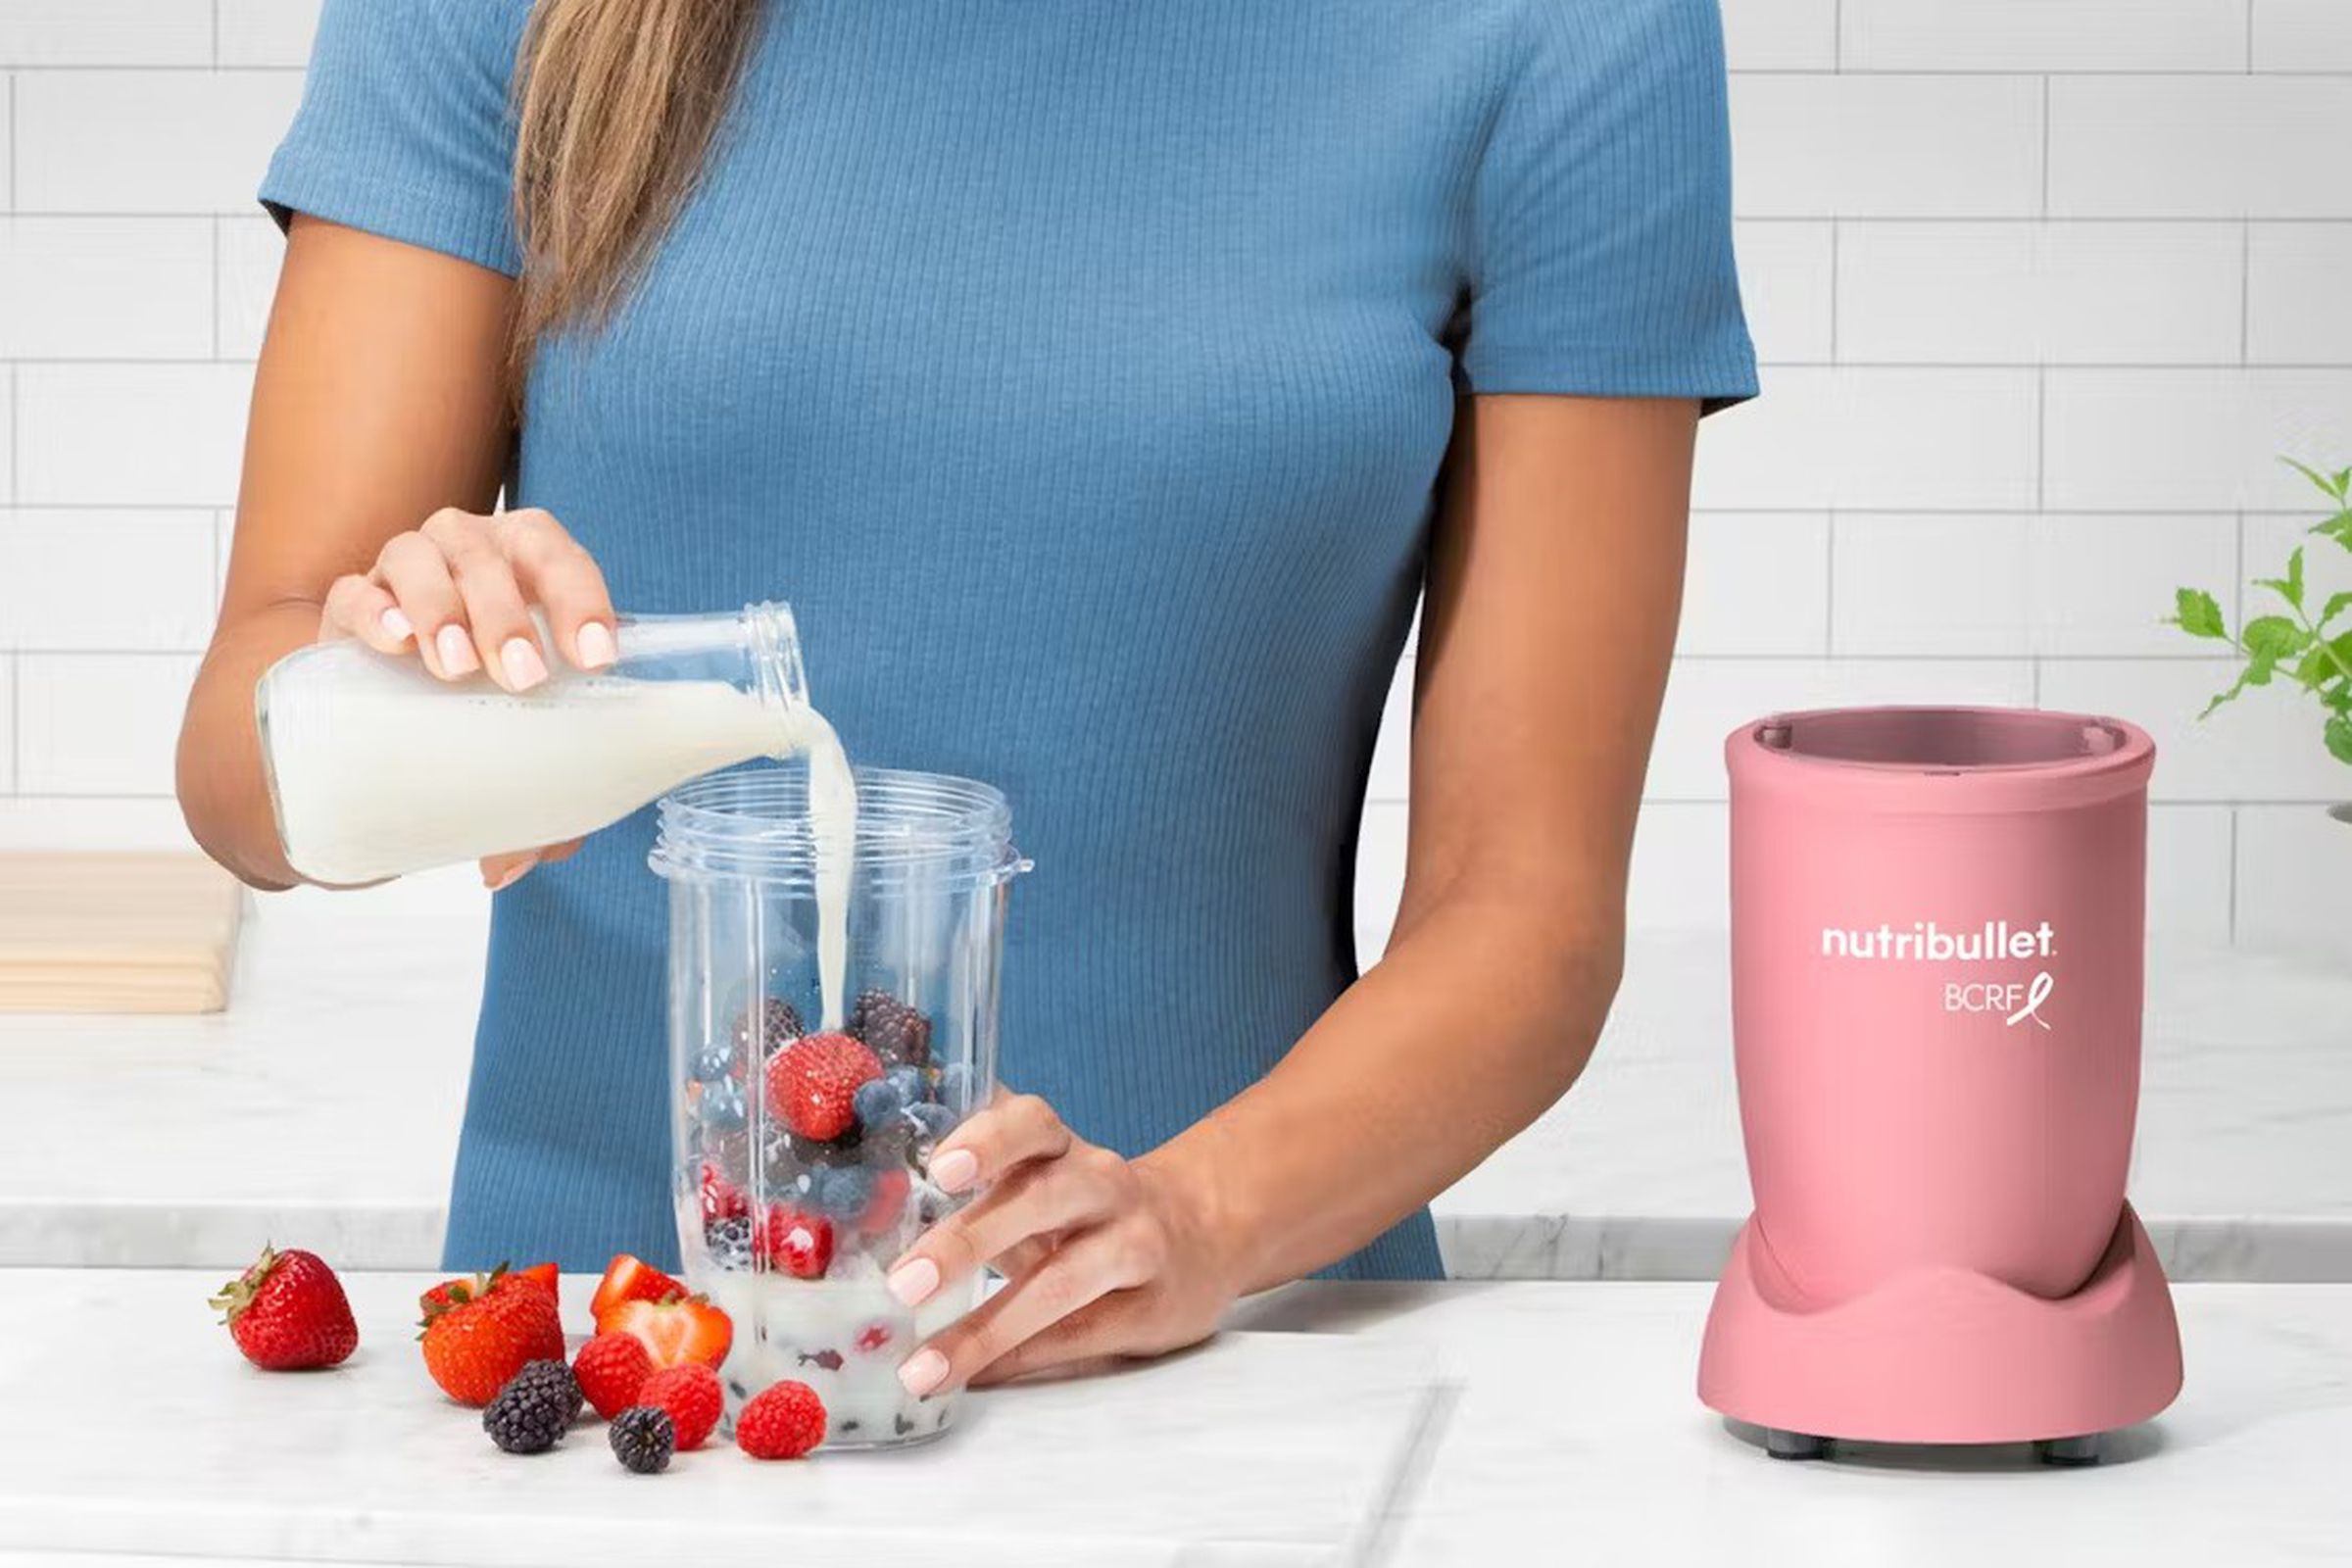 A woman preparing fruits to add to the Nutribullet Pro.